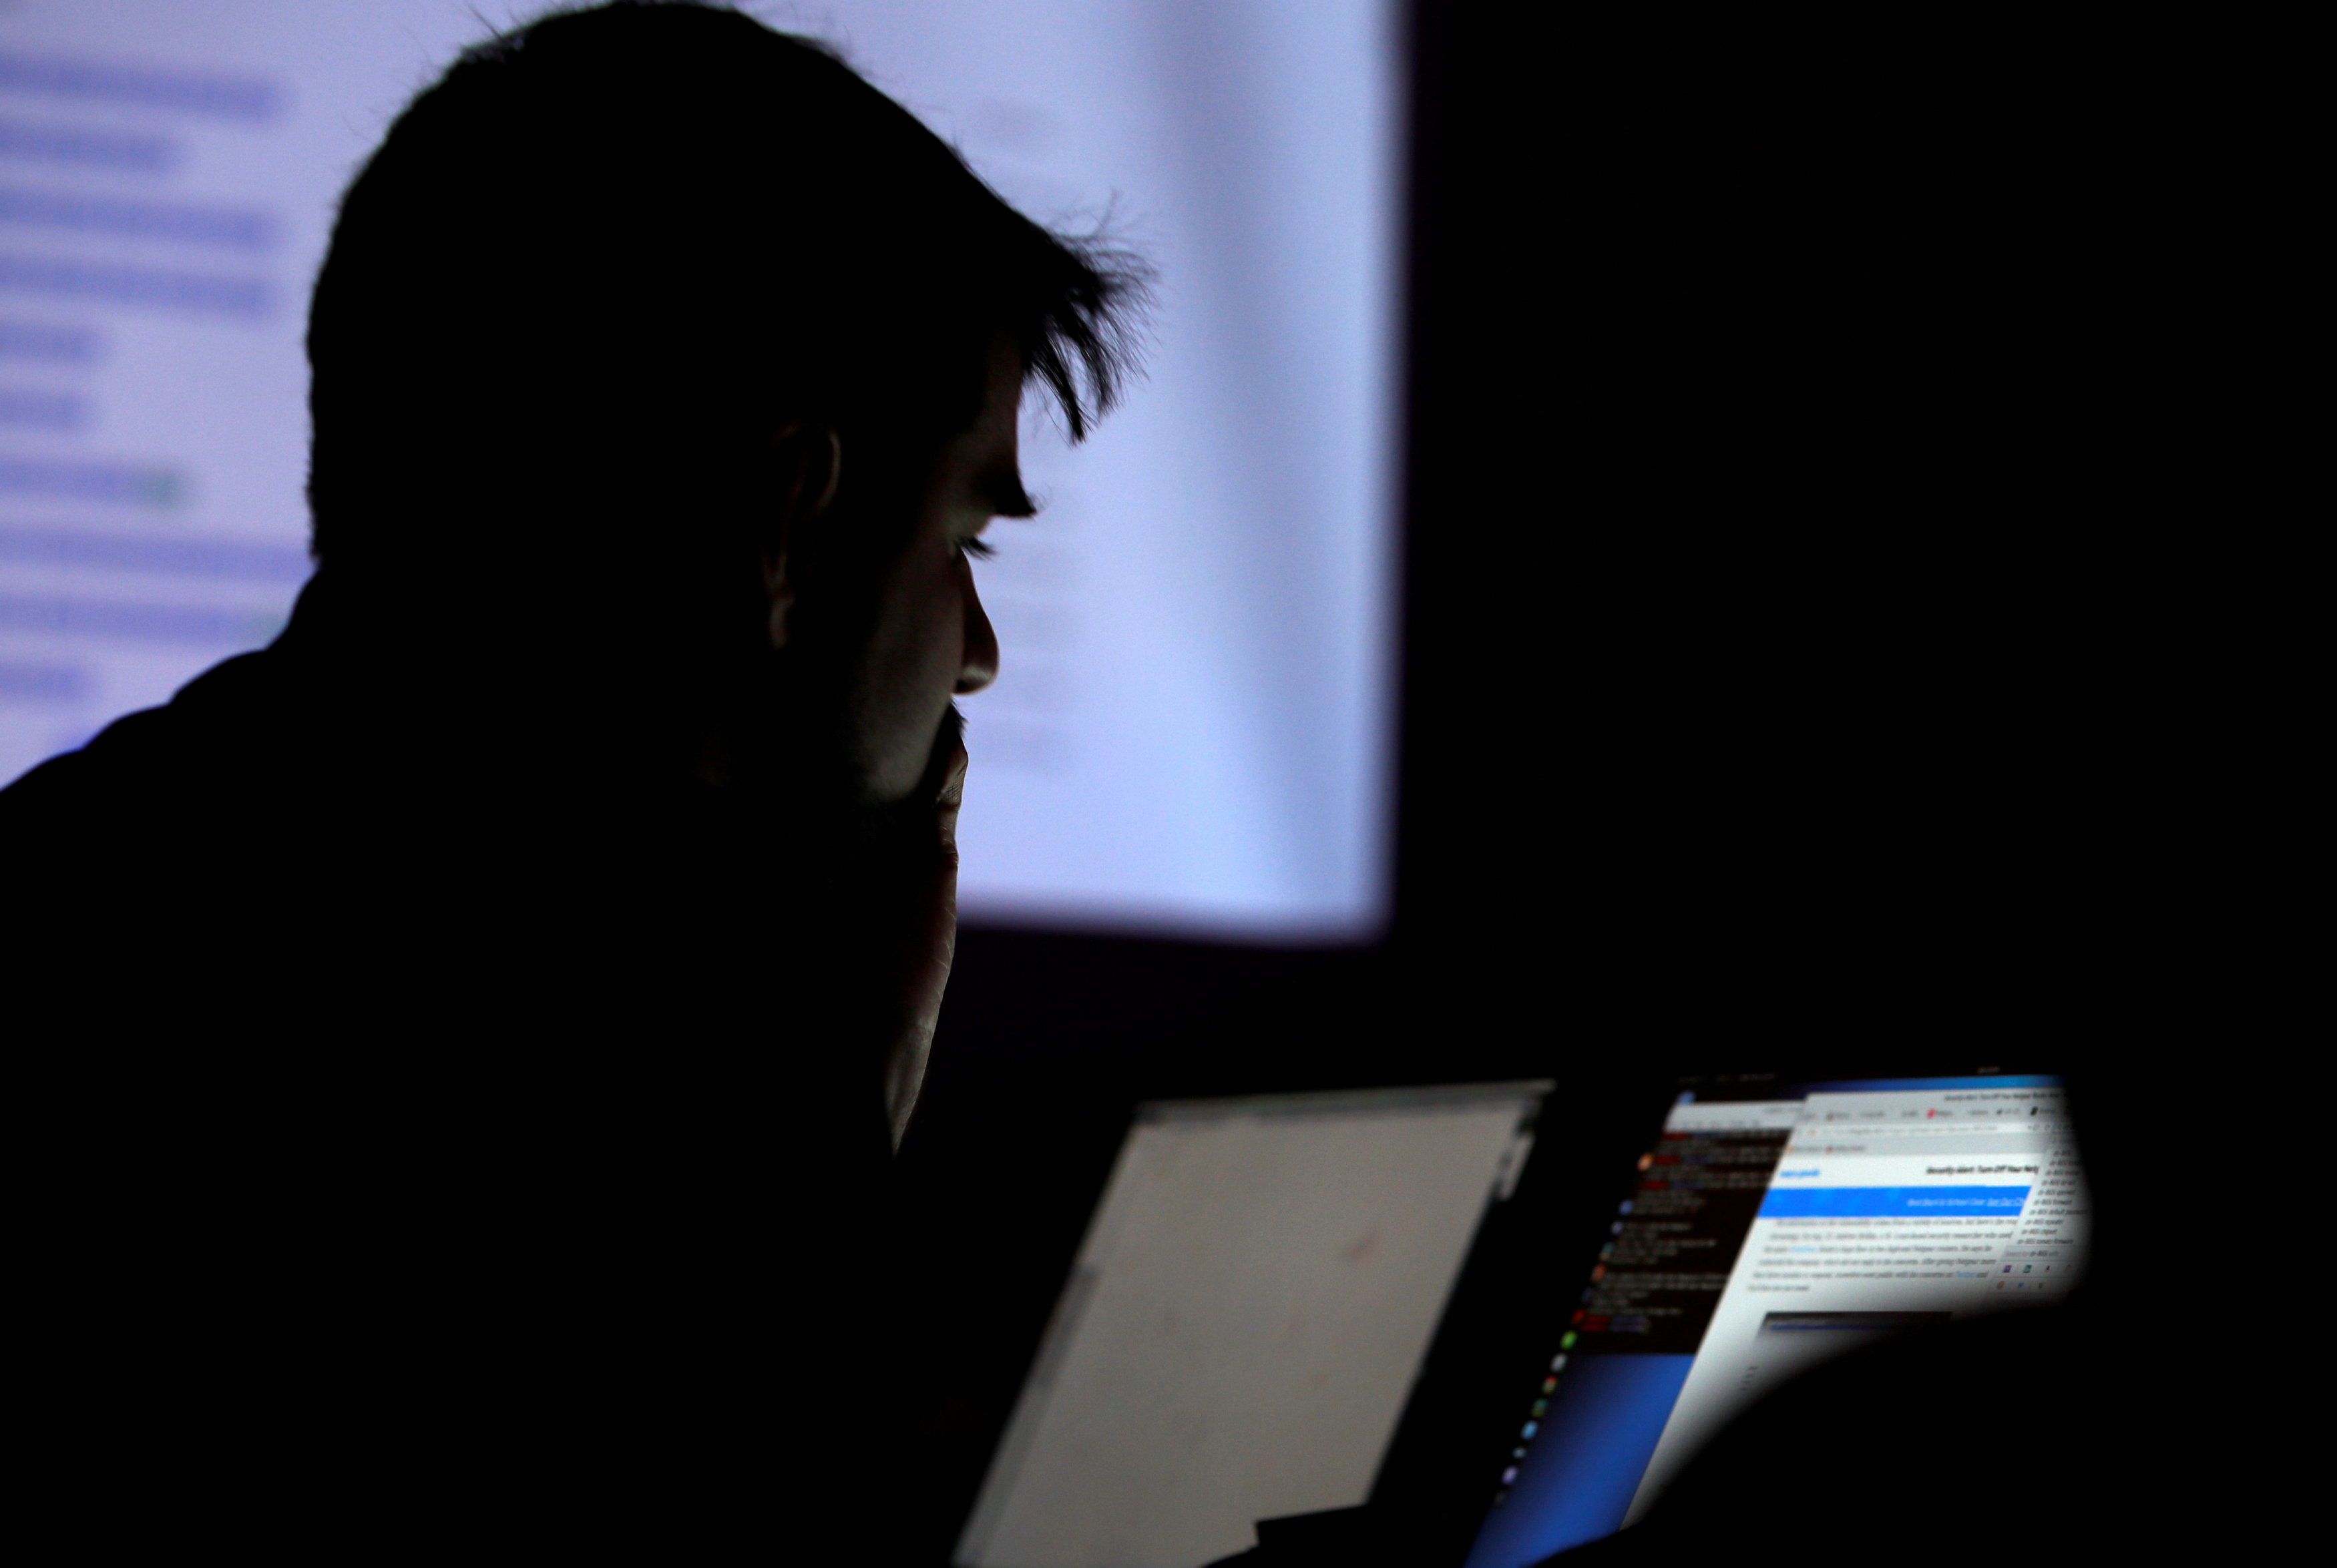 A man takes part in a hacking contest during the Def Con hacker convention in Las Vegas (REUTERS/Steve Marcus)